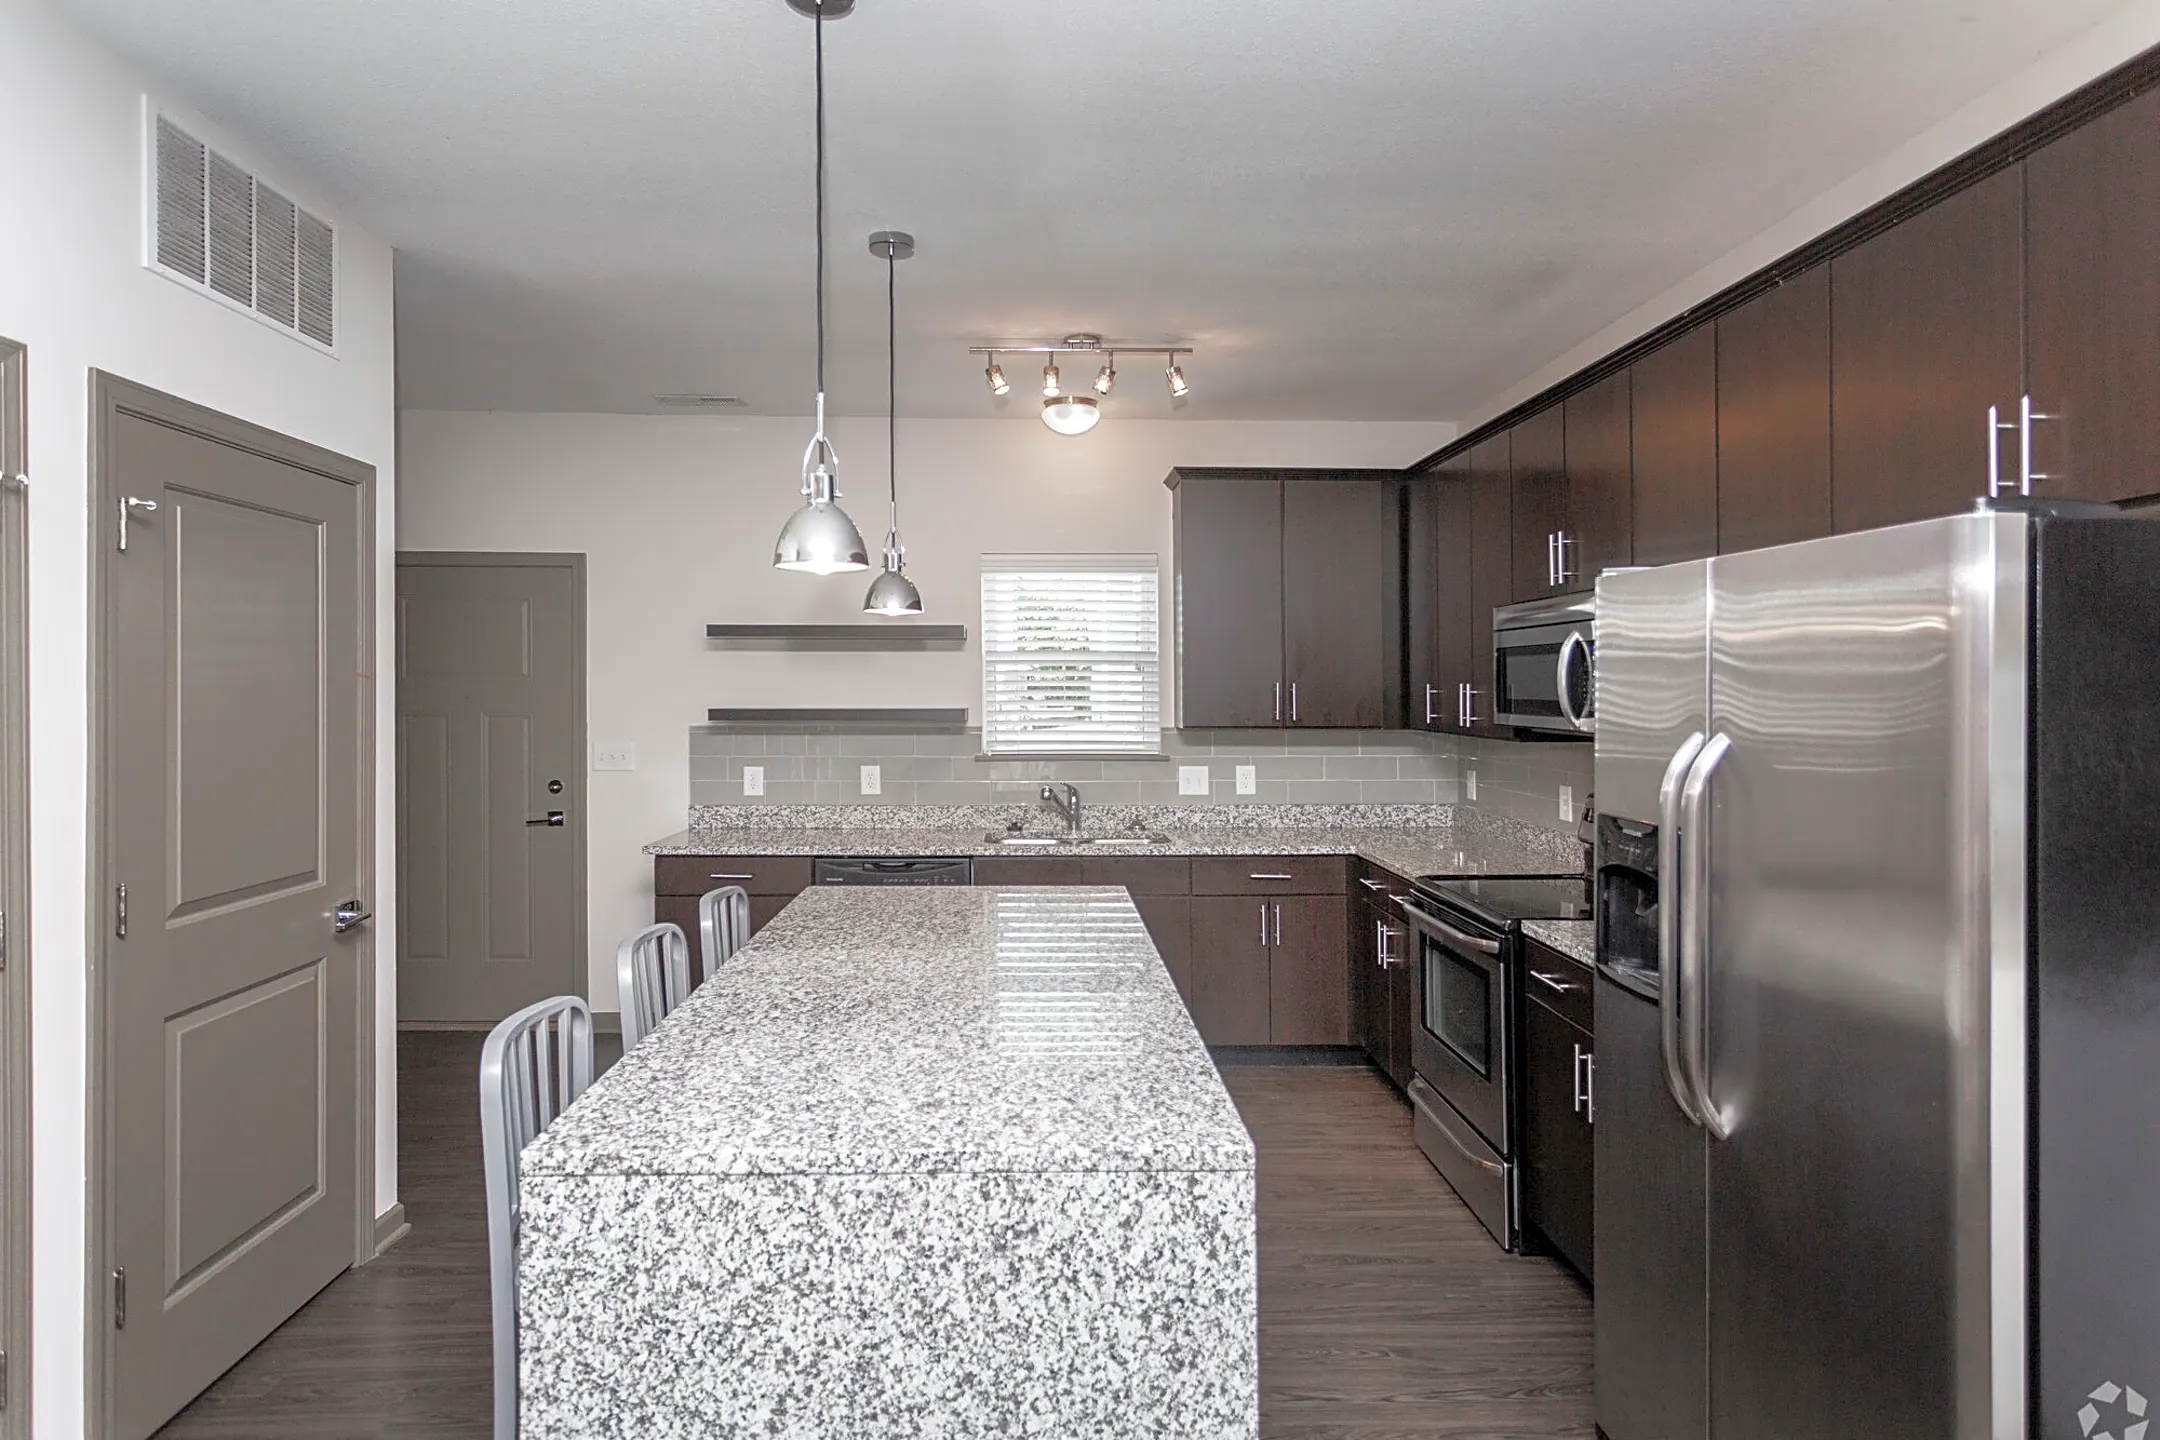 Kitchen - Summit Boutique Residences - Carmel, IN